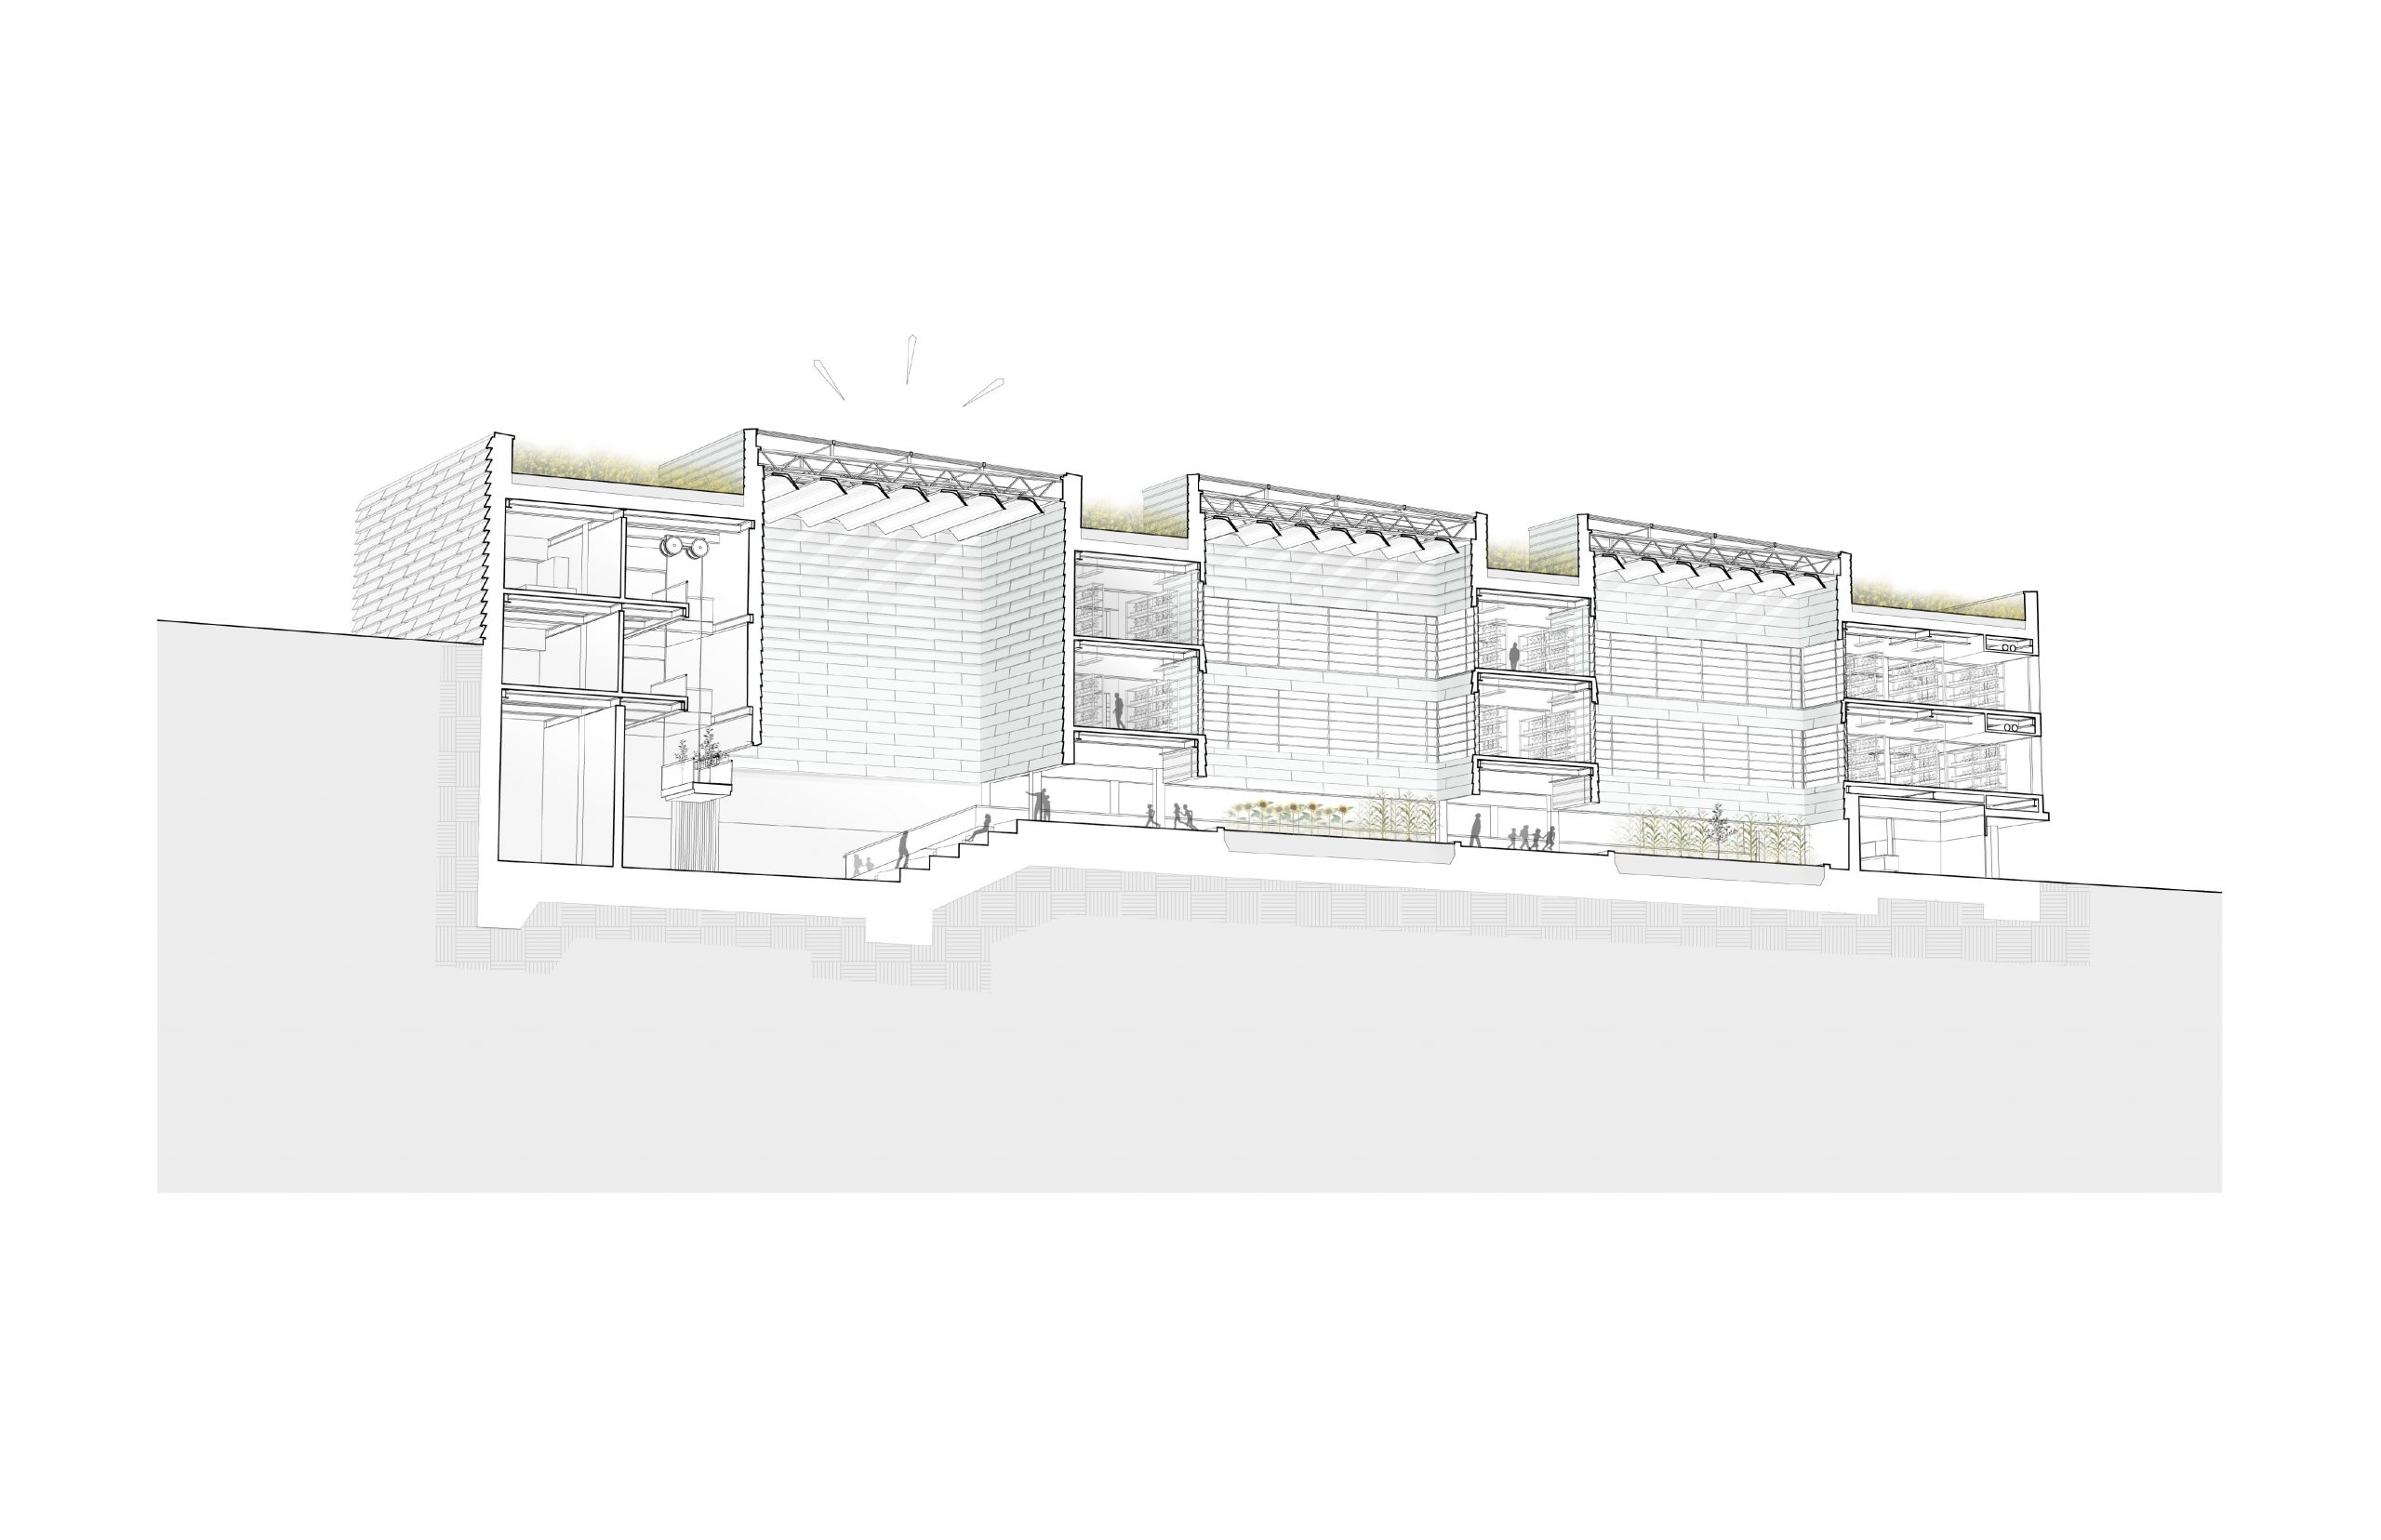 Sectional perspective drawing of a multi-level building complex with detailed facade and interior cutaways.